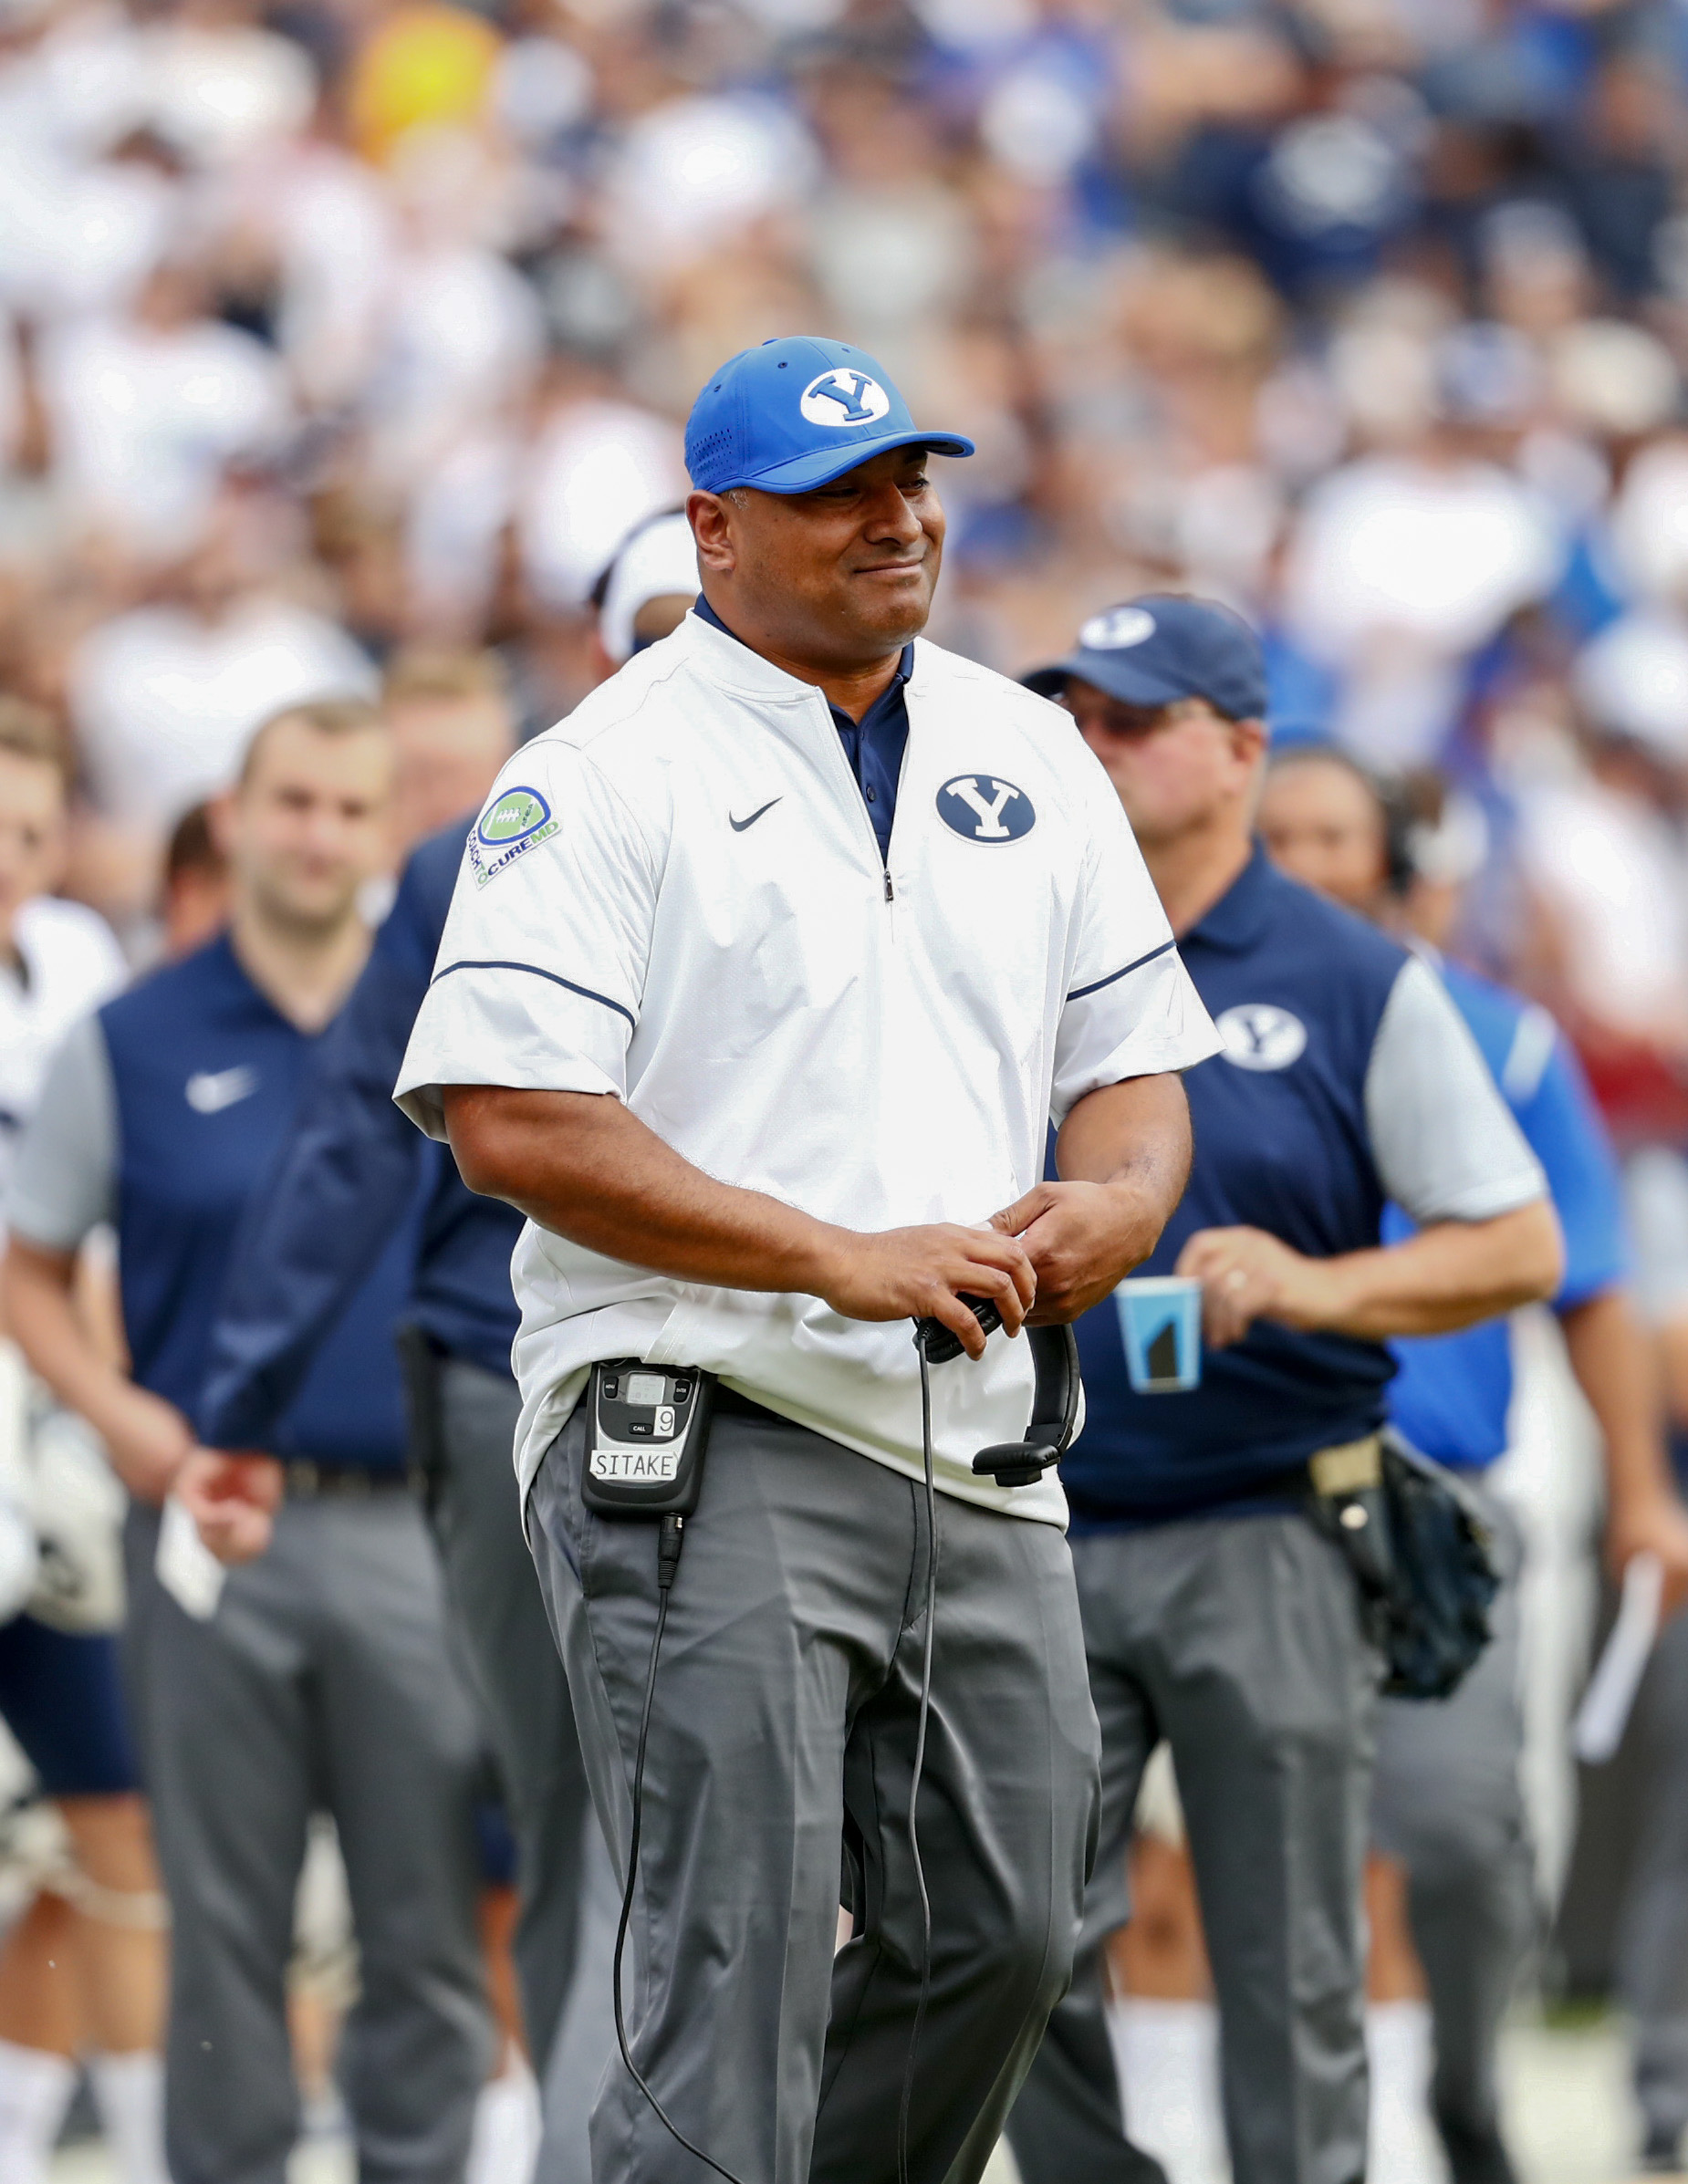 BYU head coach Kalani Sitake watches the game from the sidelines. Sitake's Cougars lost 35-32. (BYU Photo)